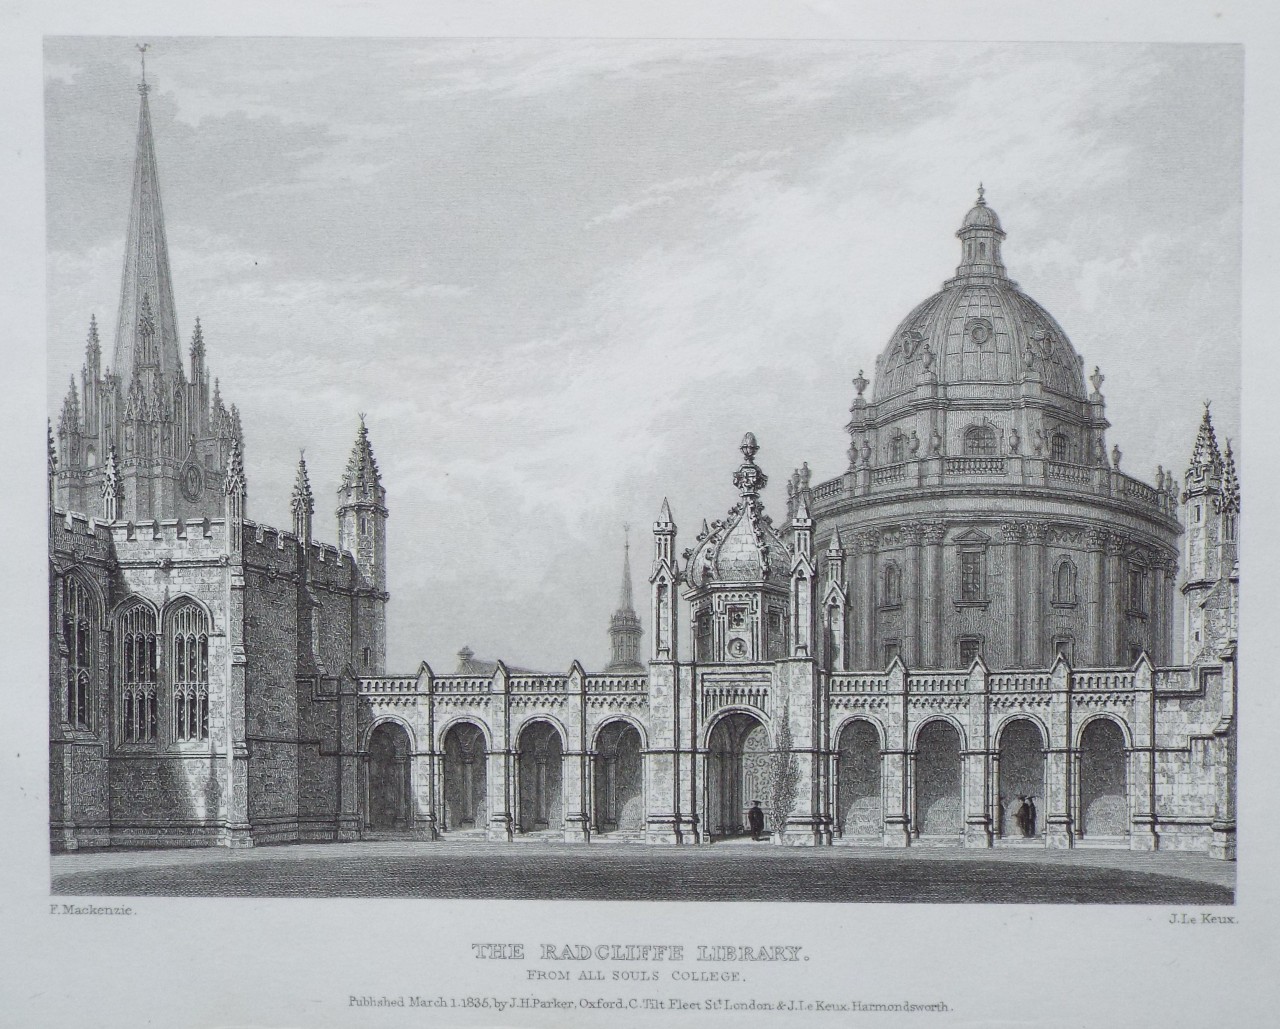 Print - The Radcliffe Library. From All Souls College. - Le